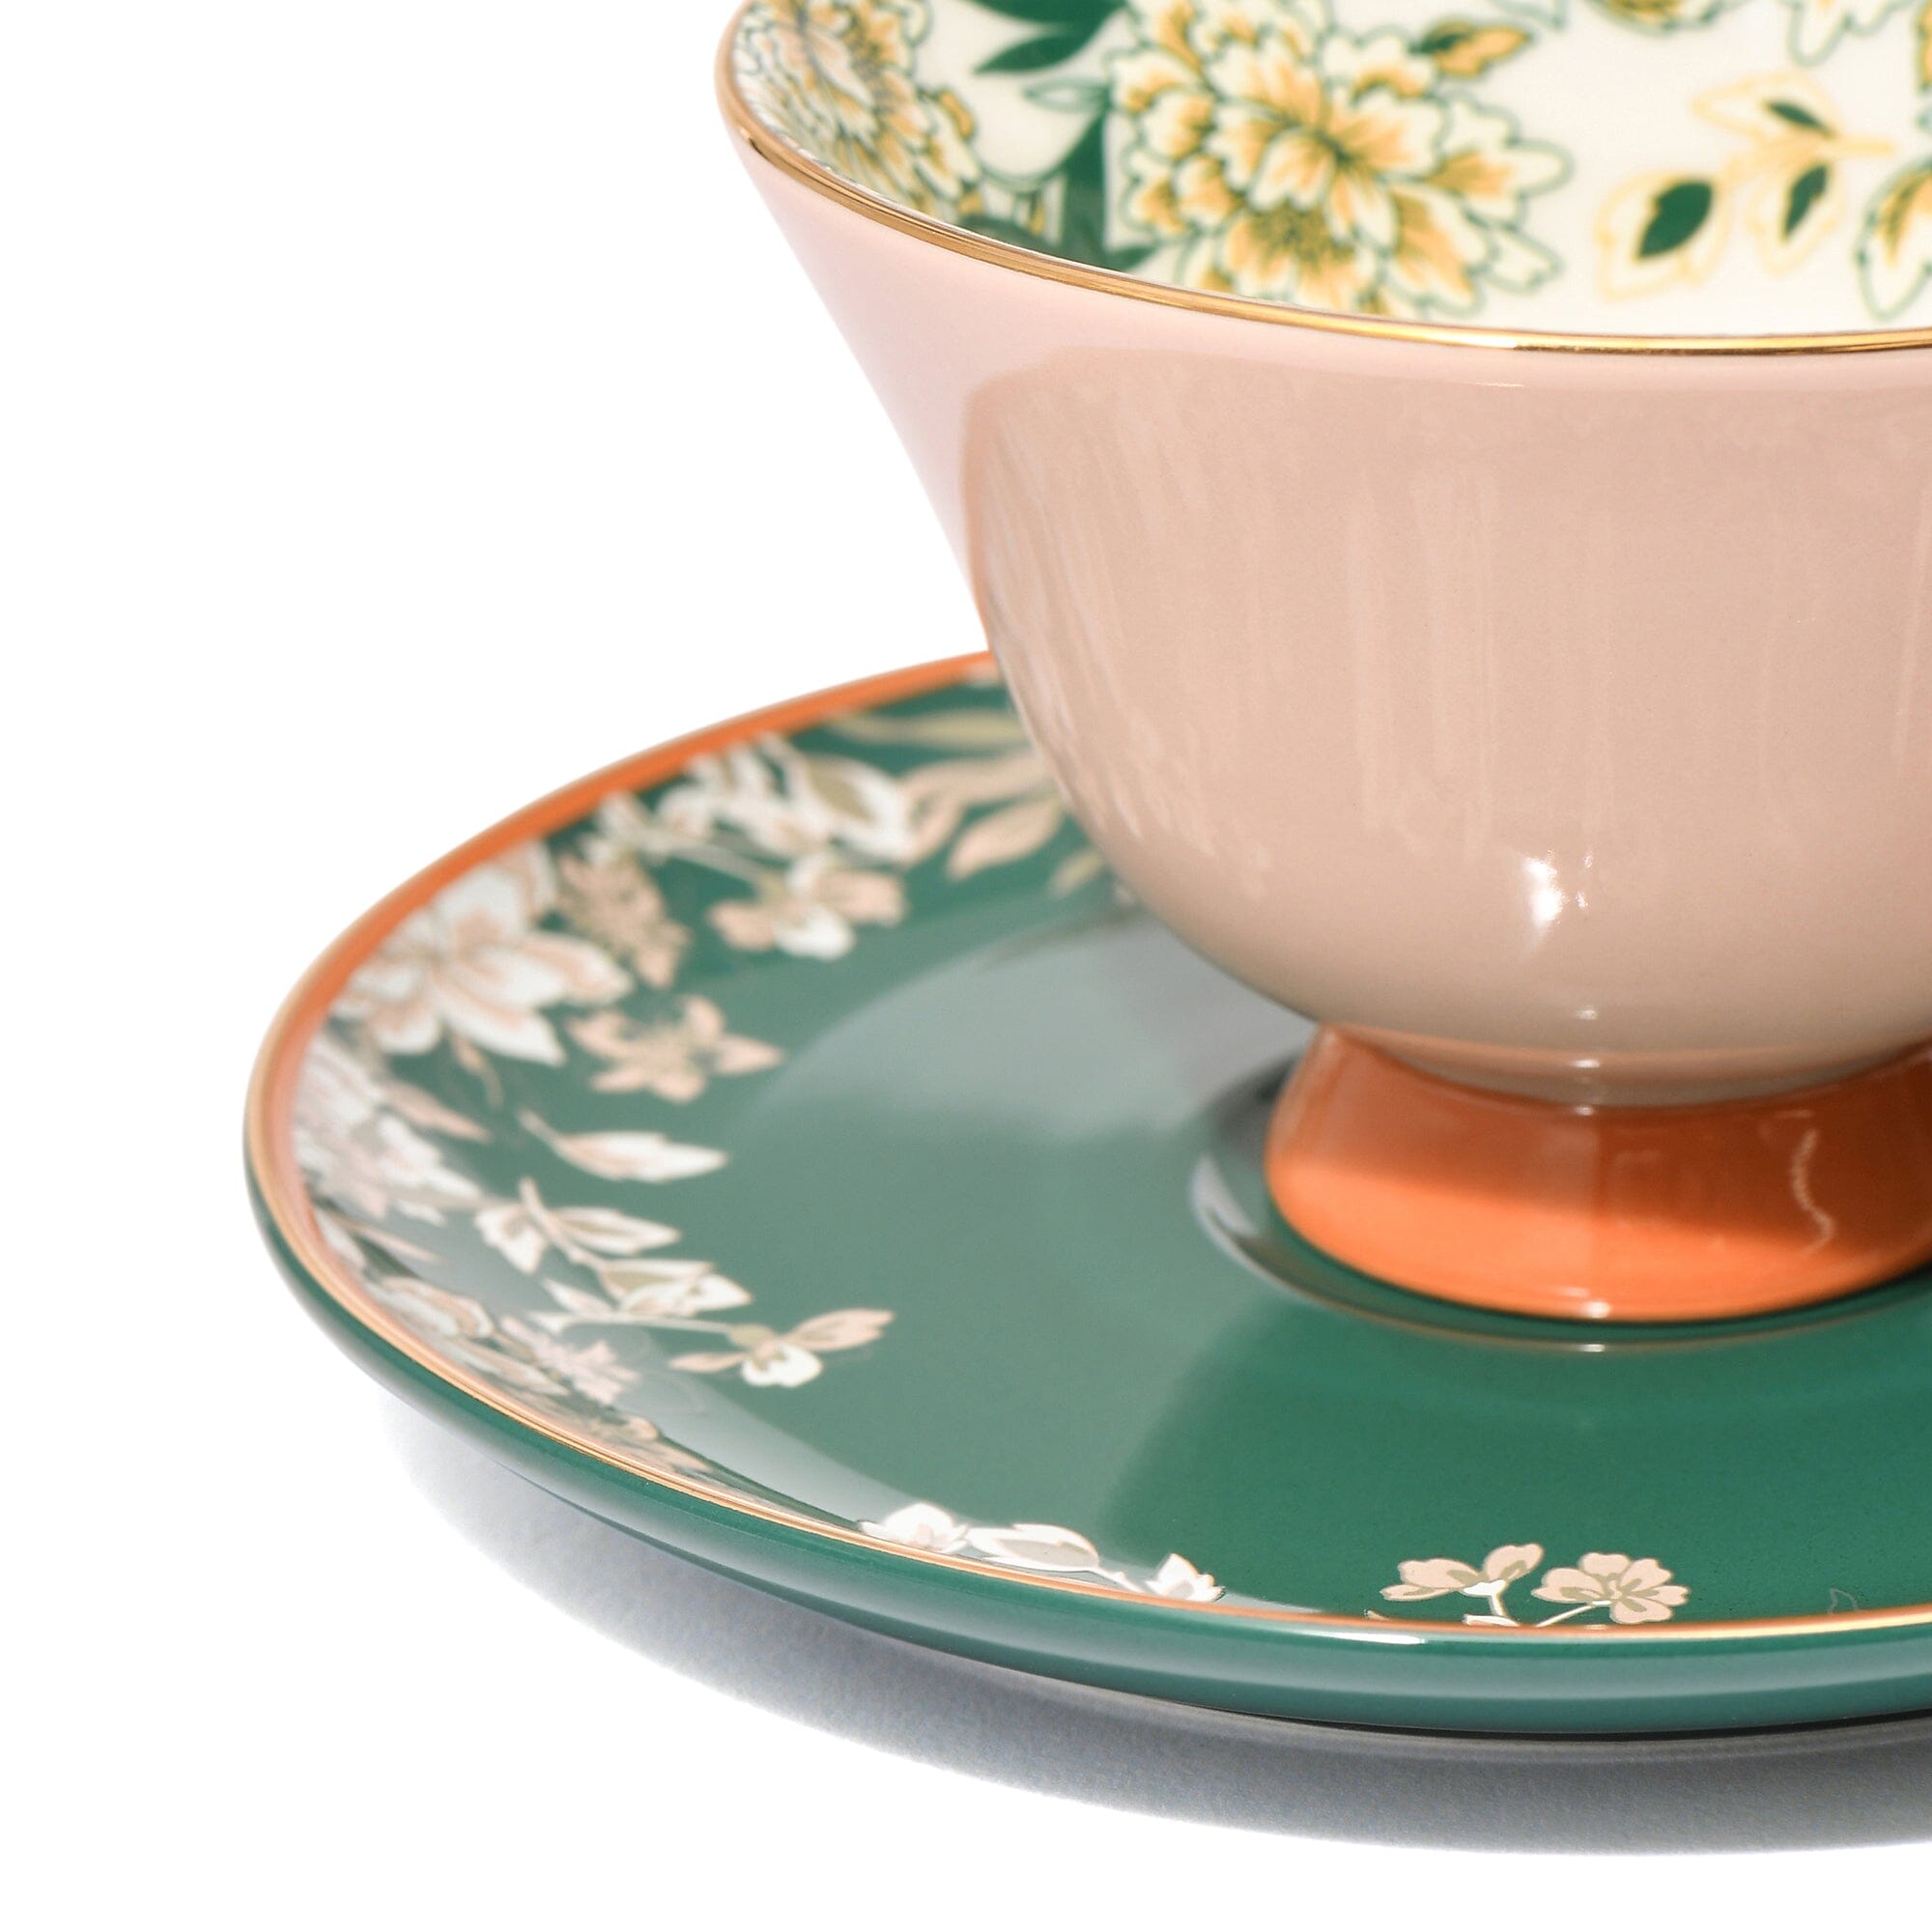 Chinoiserie Cup&Saucer  Pink